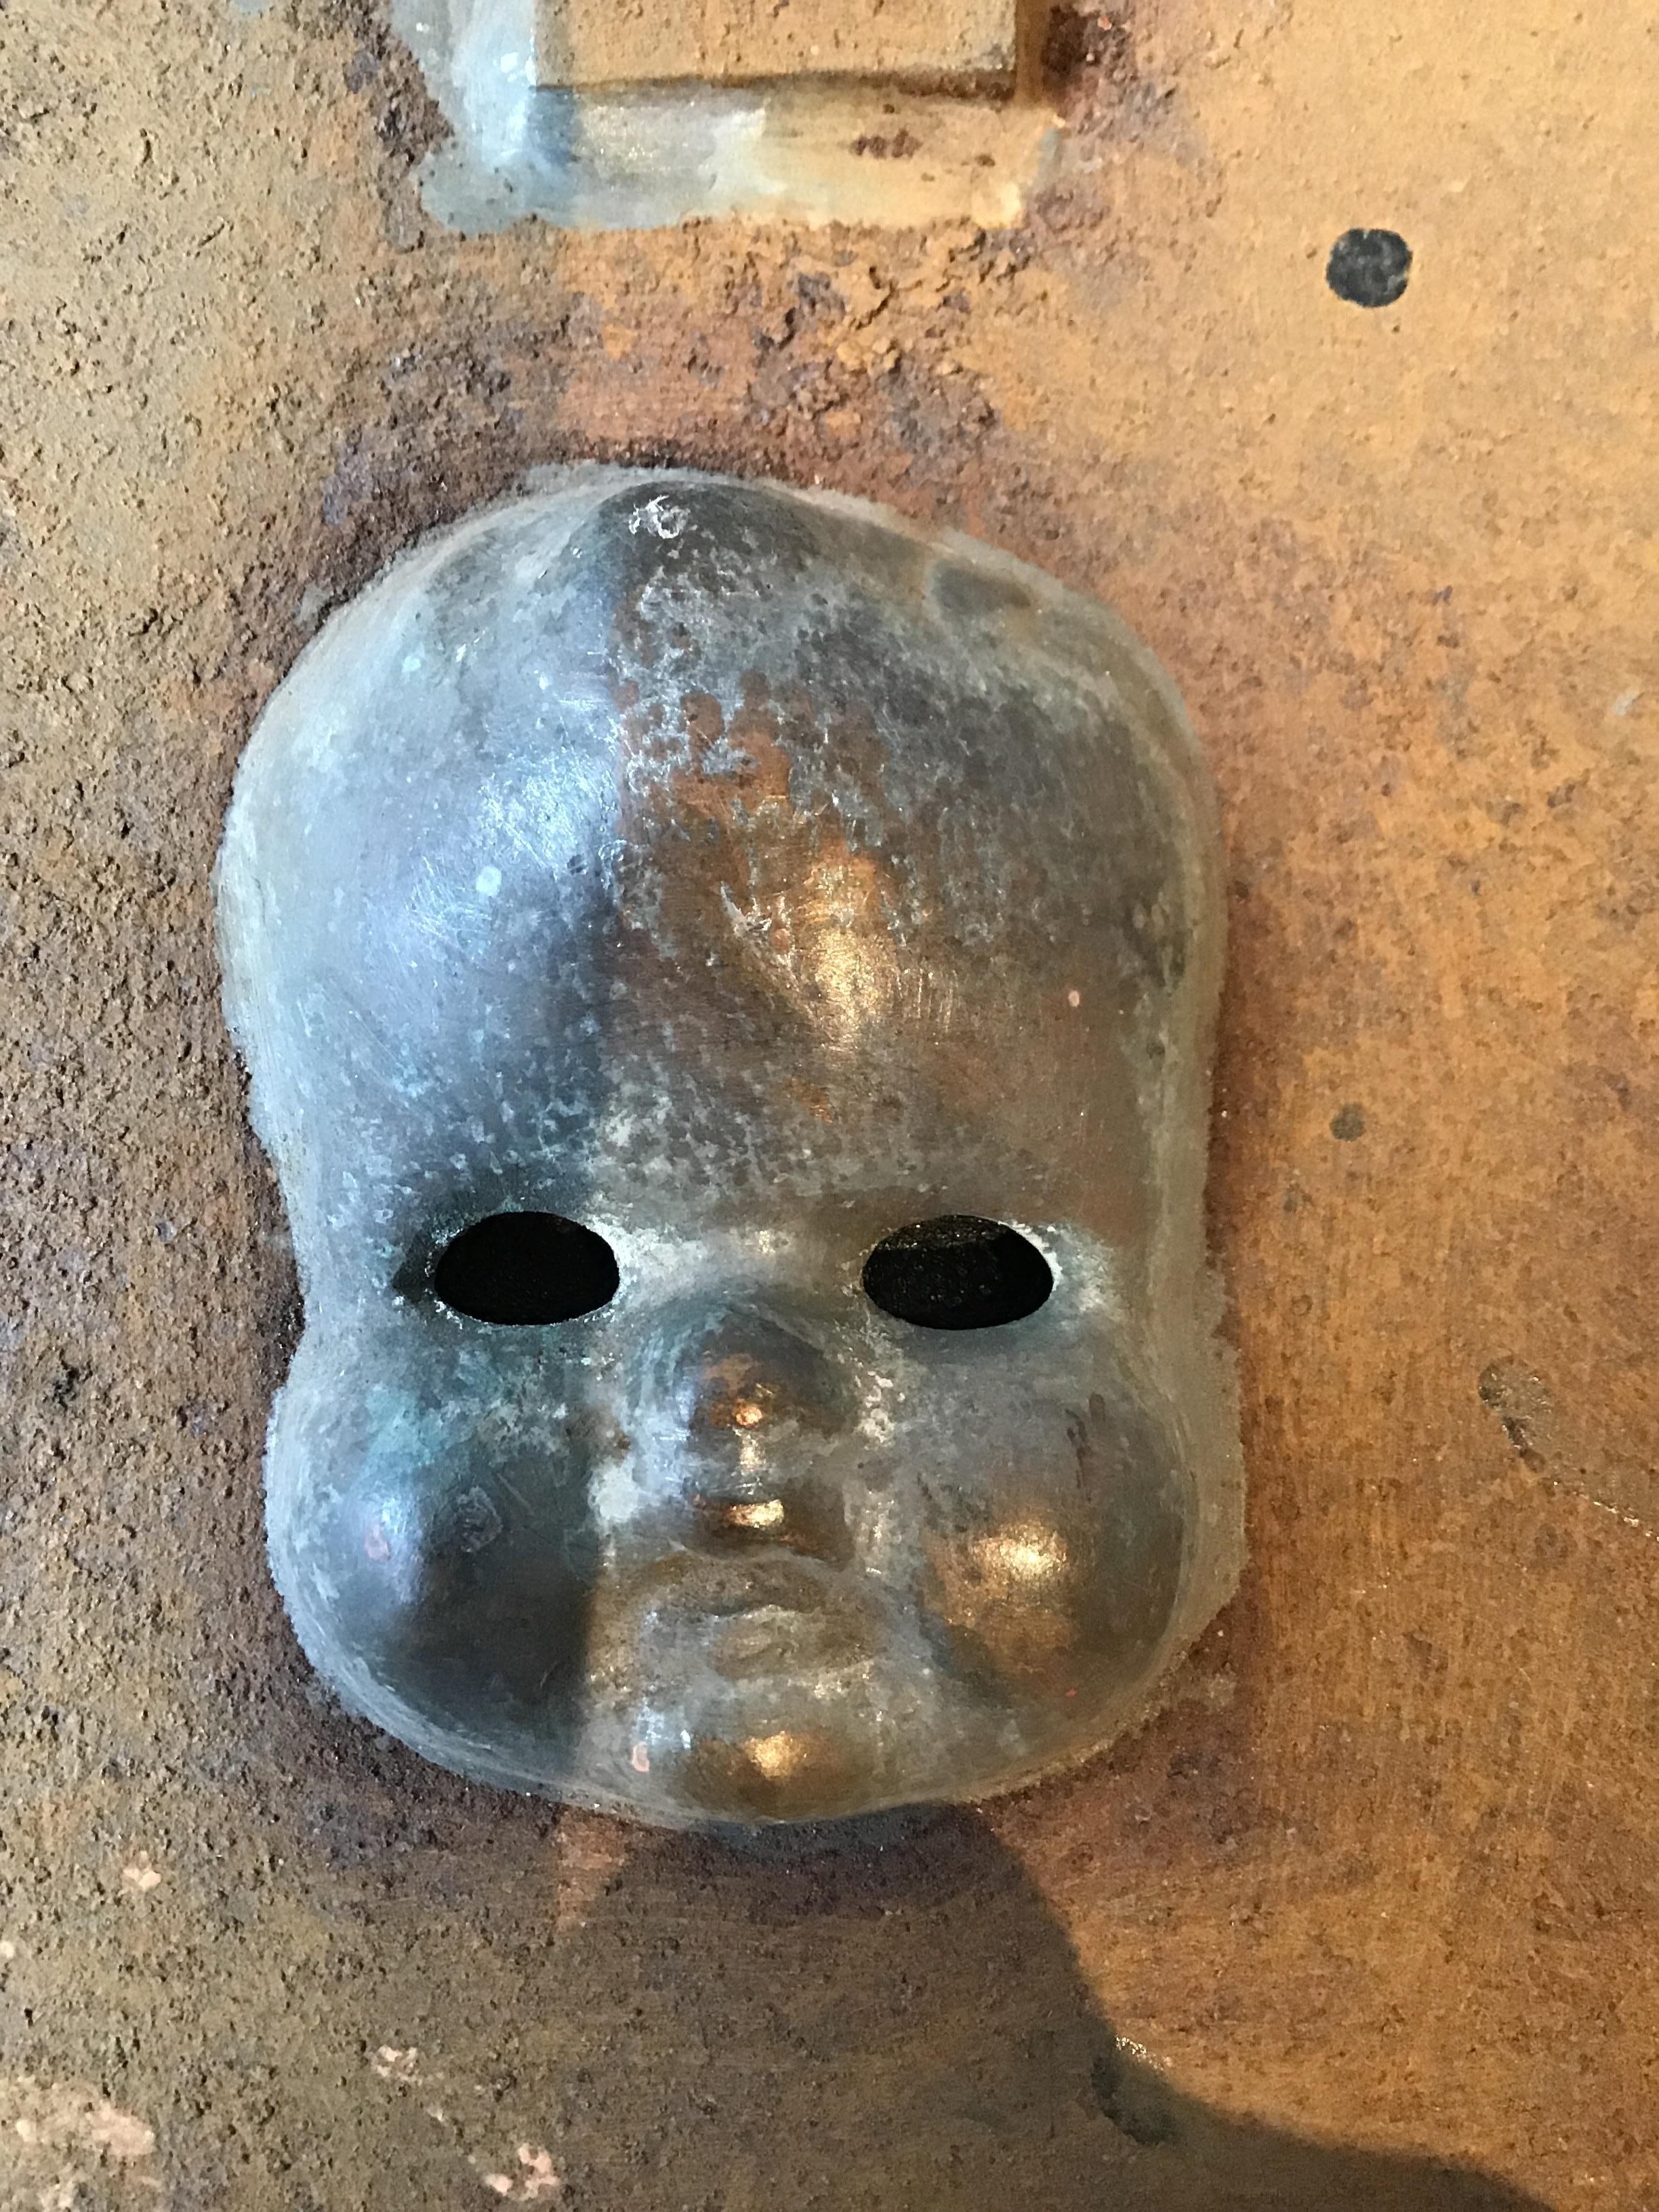 1940s Toy mold of a baby doll face.